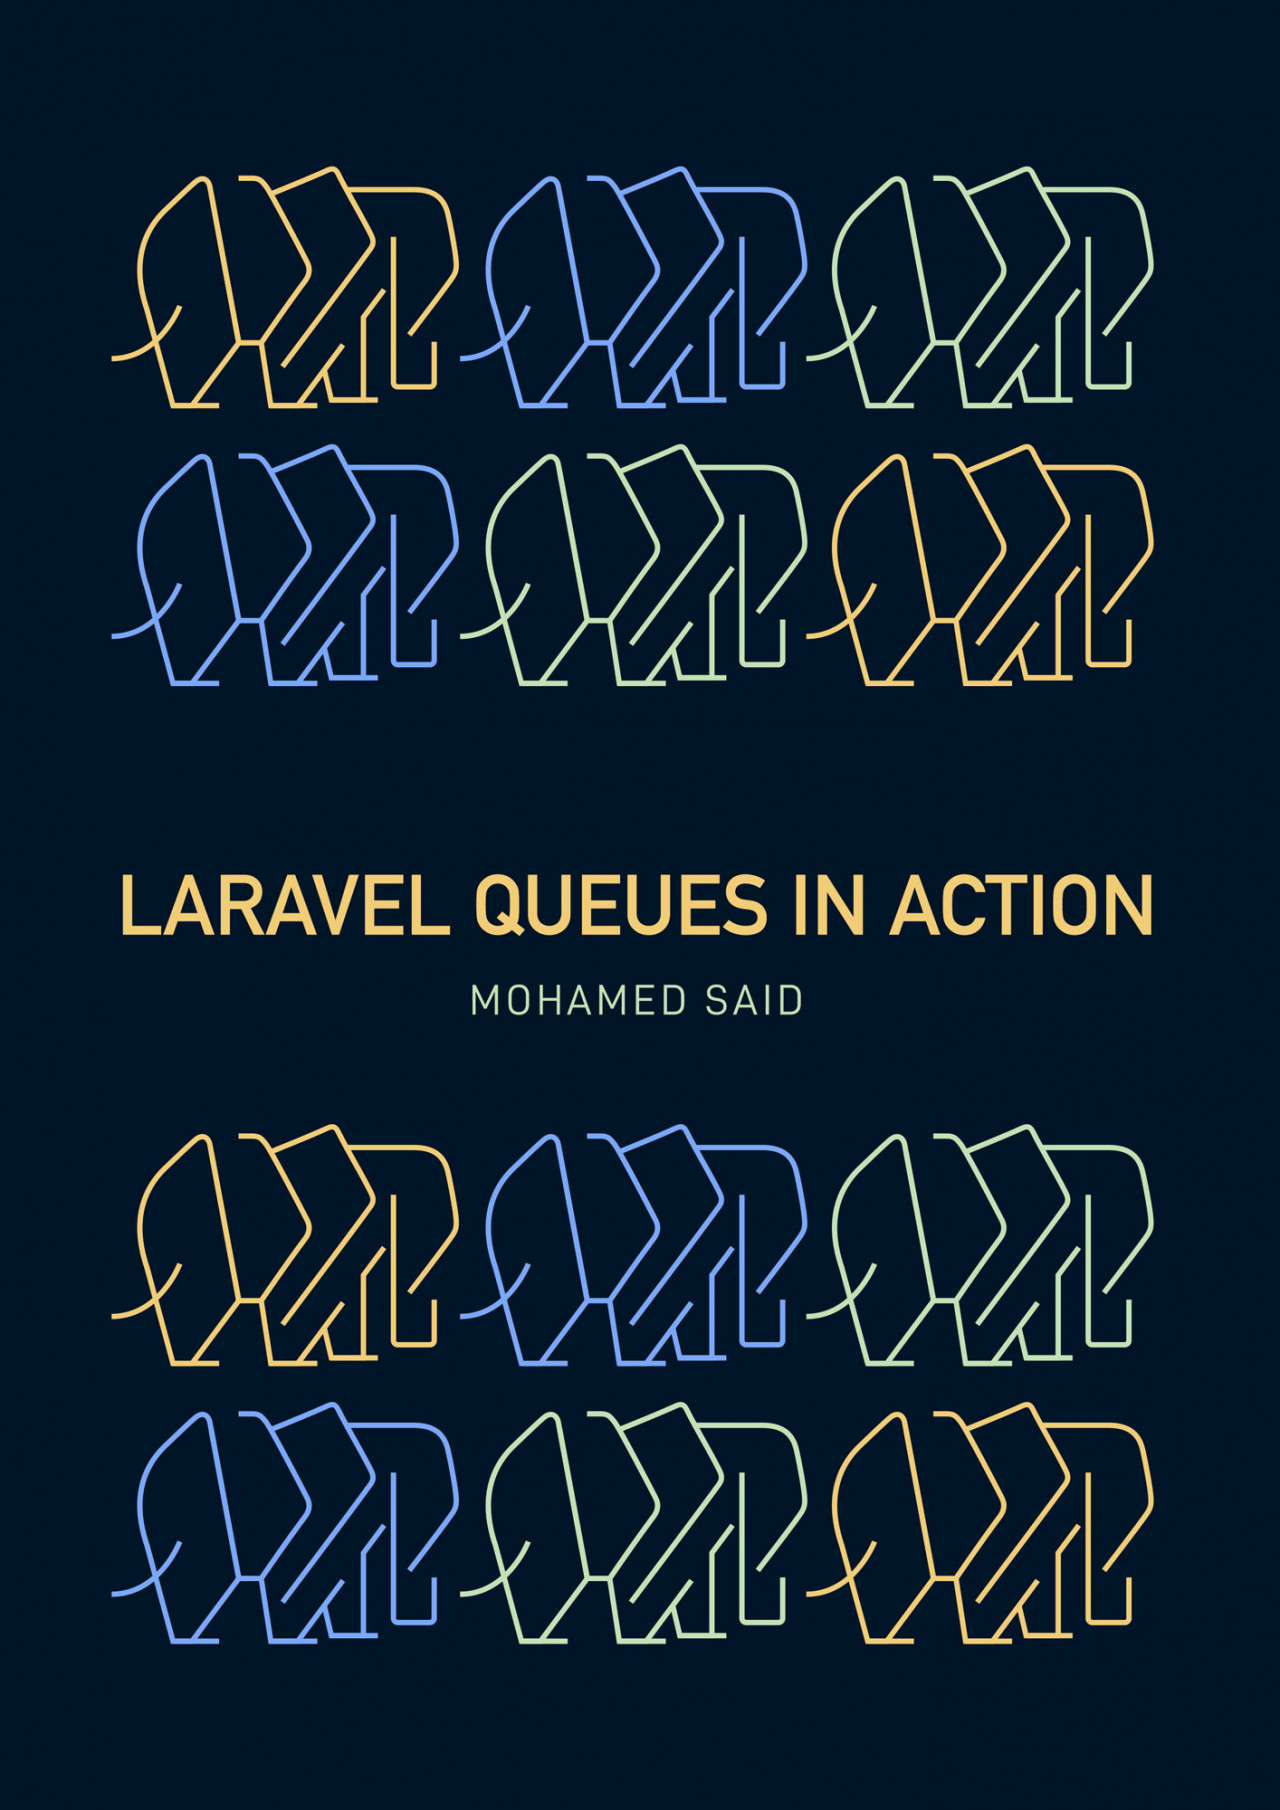 Online meet-up: Mohamed Said over Laravel Queues in Action